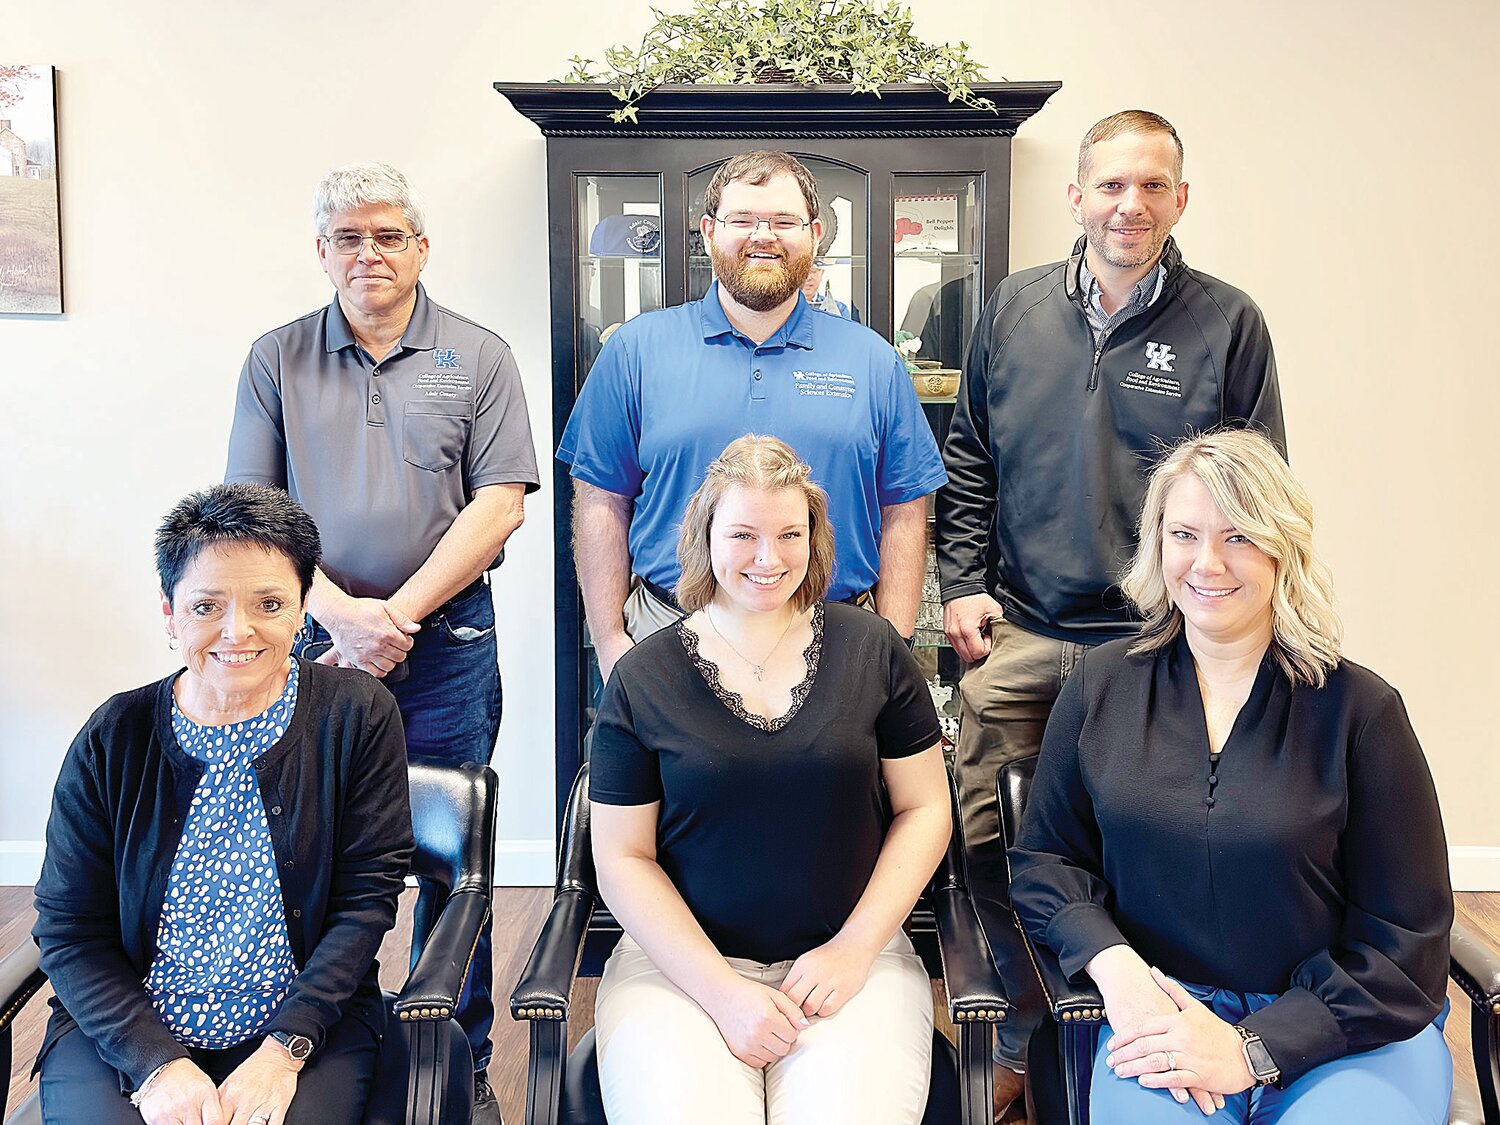 Adair County Extension Staff (front, from left) Teresa Bright, Magnolia Wells, Ashley Curry, (back row, from left) Tony Rose, Dylan Gentry and Nick Roy.